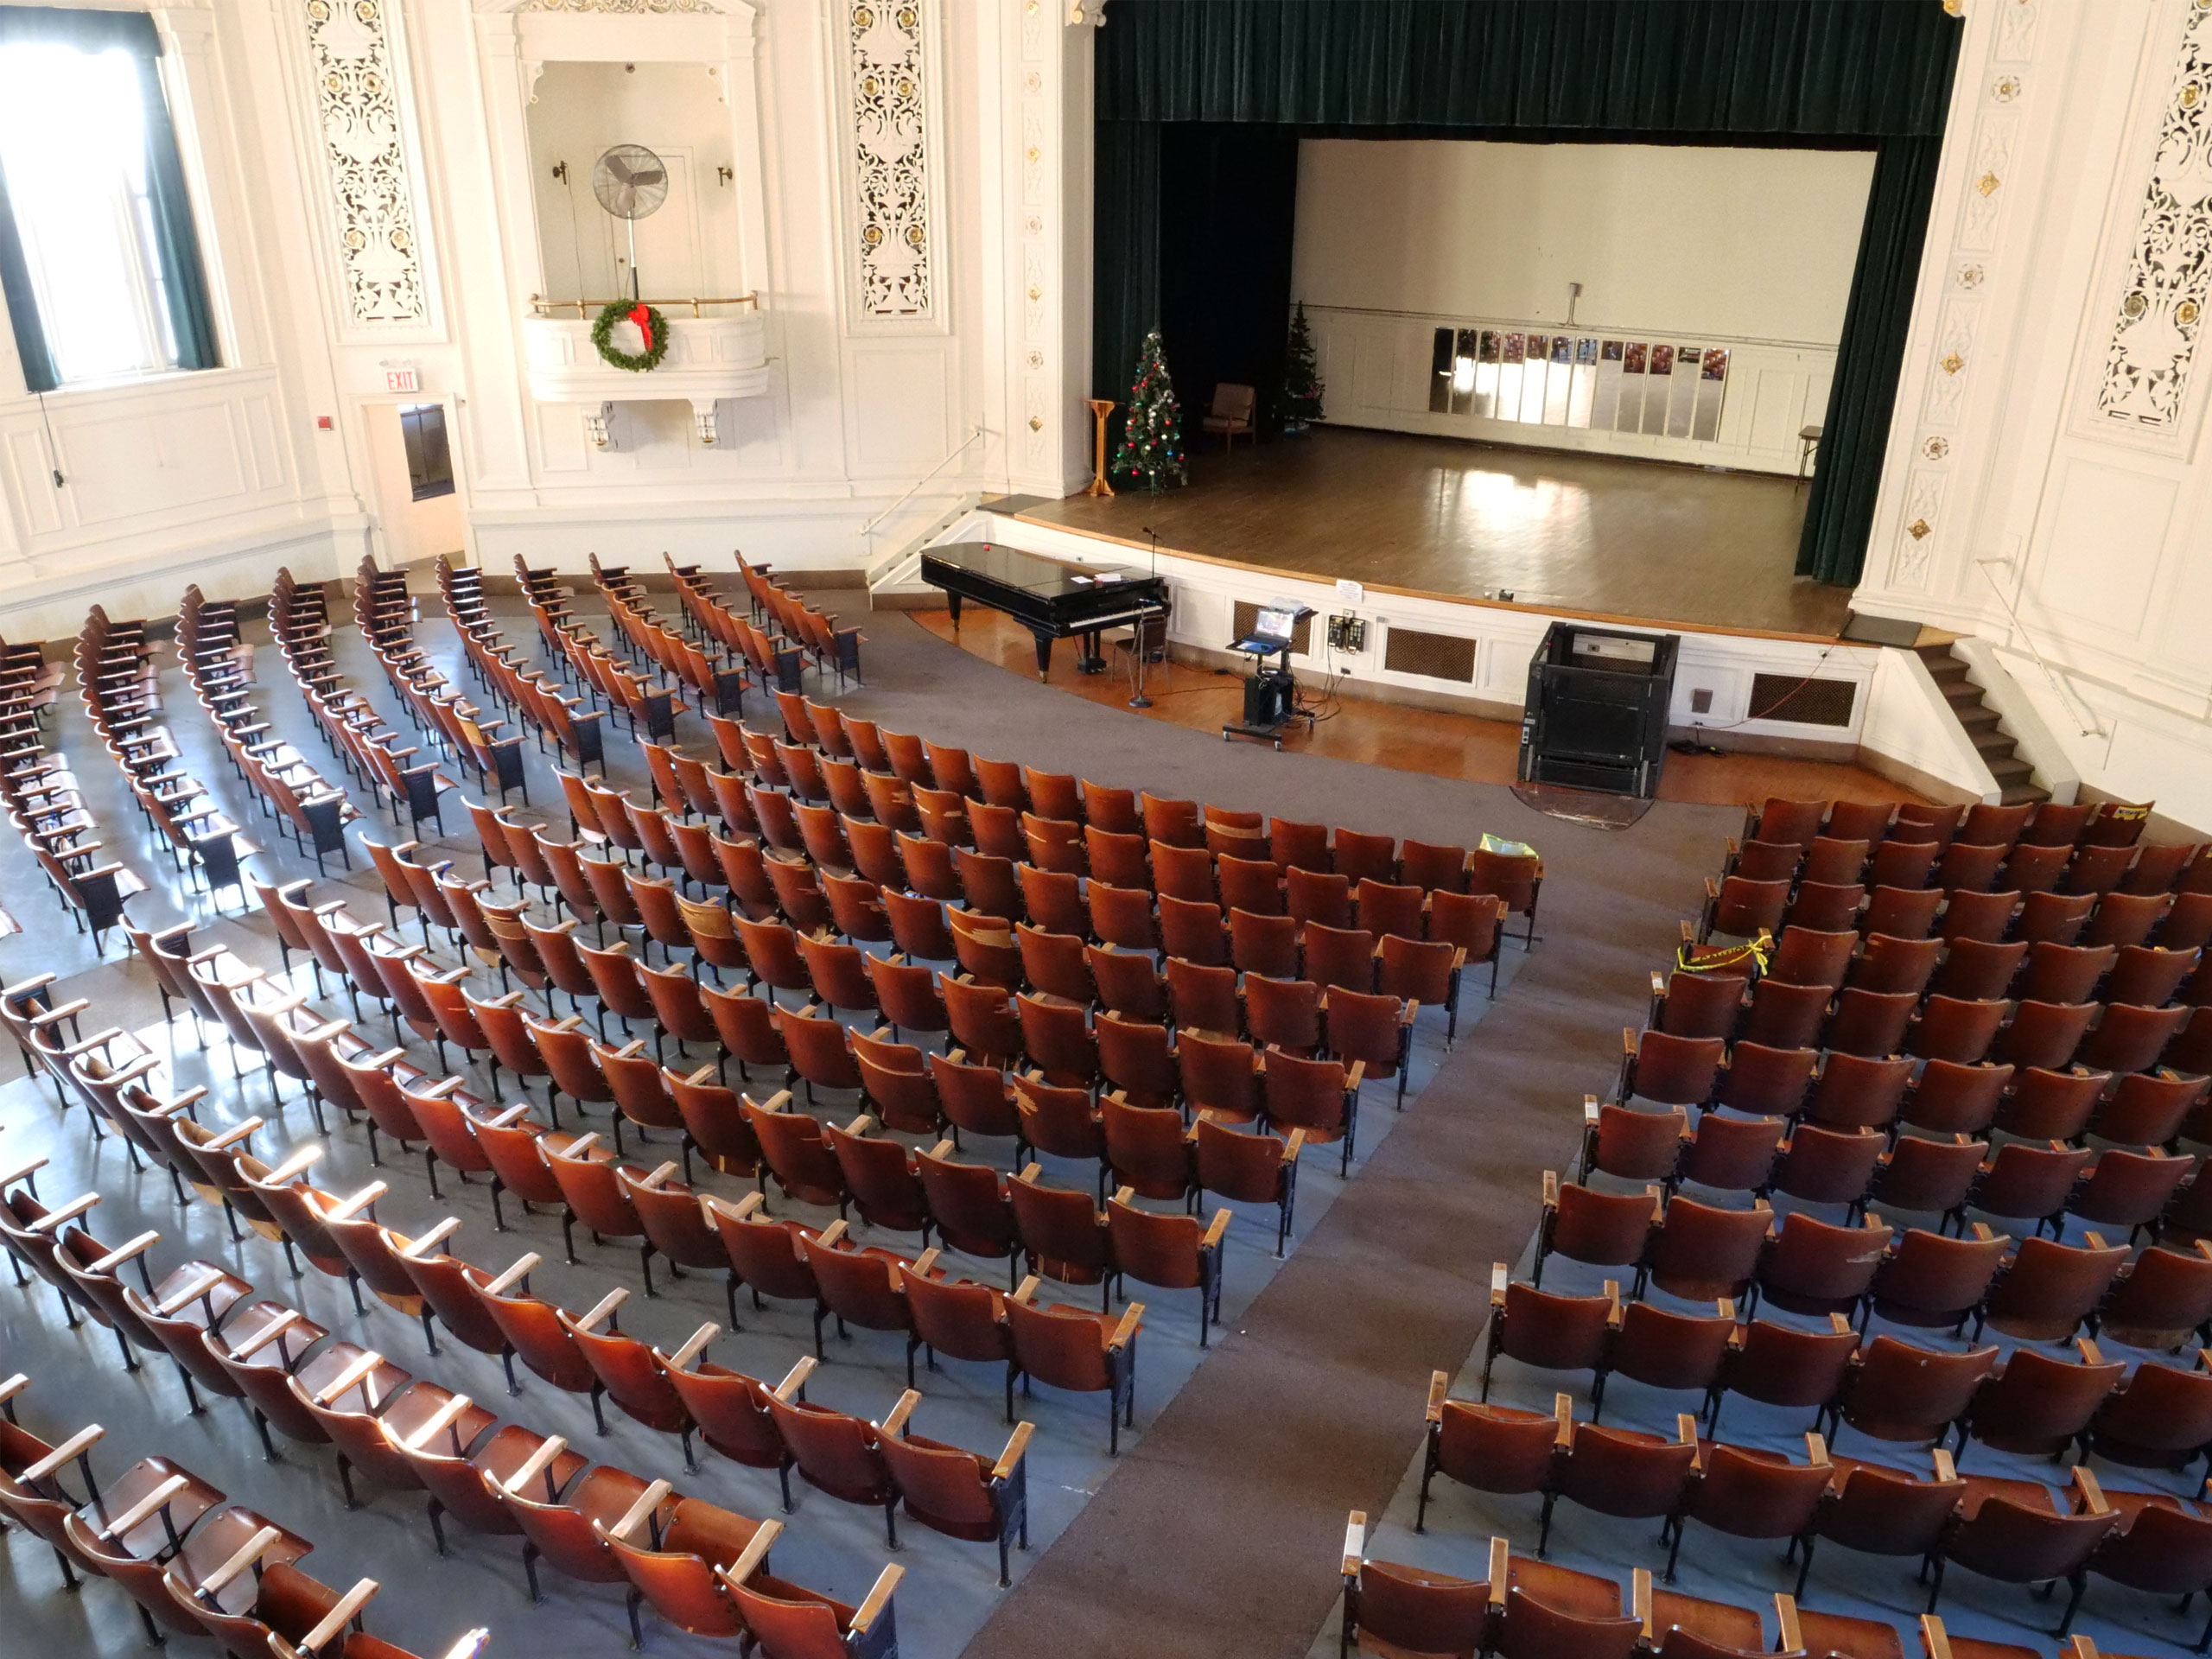 In an aerial view of the school auditorium we look down to view many wood folding seats, two small balcony boxes, Christmas wreath hanging on the balcony box, black concert grand piano, laptop and project equipment, microphone, vertical wheelchair lift, theater stage, wooden lecture stand, two Christmas tree stands on an auditorium stage and rectangular wall mirrors back of the stage in the background.